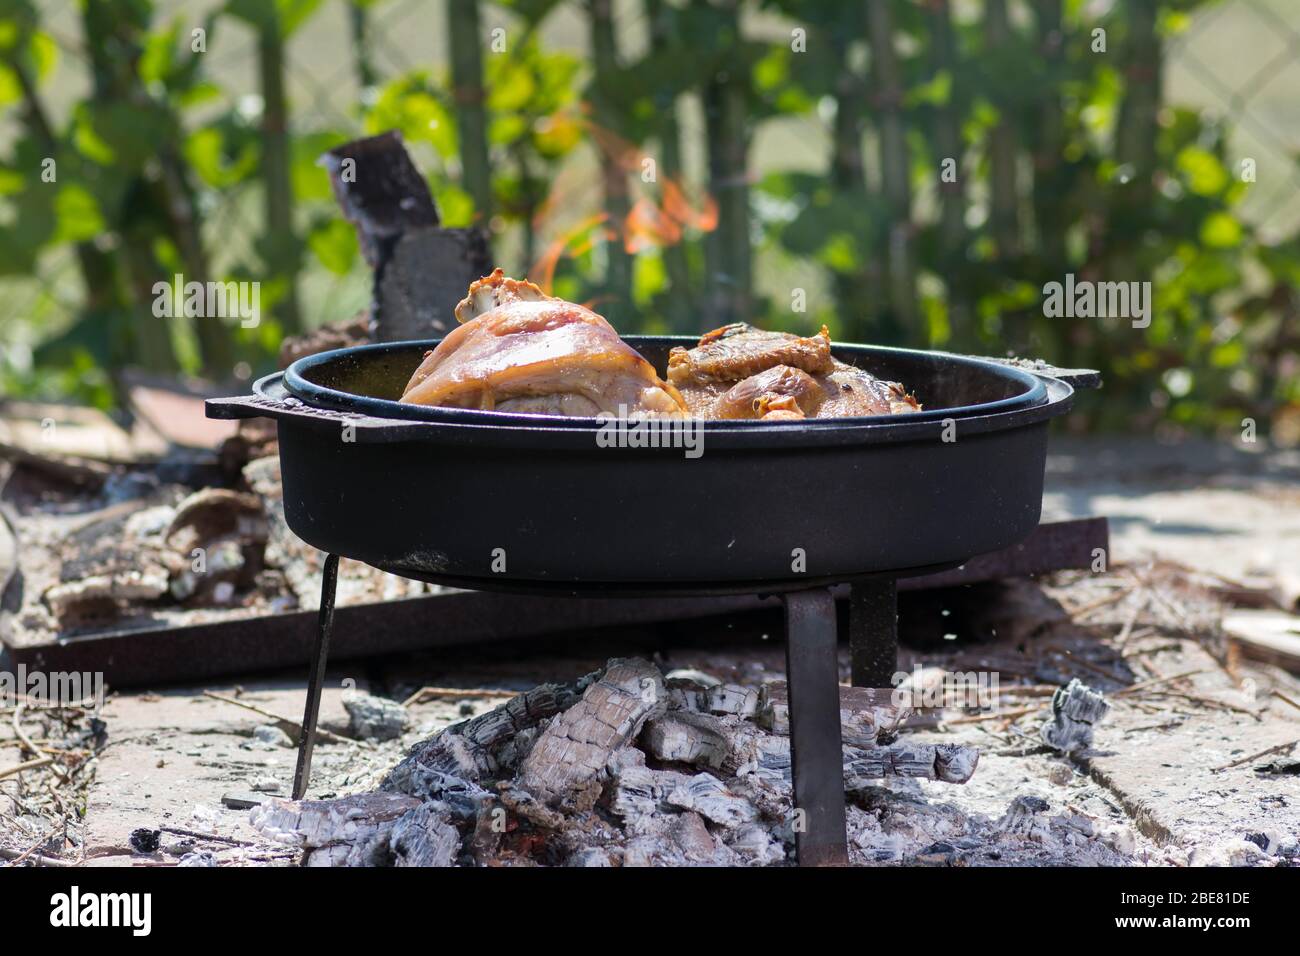 https://c8.alamy.com/comp/2BE81DE/cooking-of-traditional-croatian-meal-peka-in-metal-pots-called-sac-sach-or-sache-fireplace-with-open-fire-and-burning-coals-the-prepared-ingredient-2BE81DE.jpg